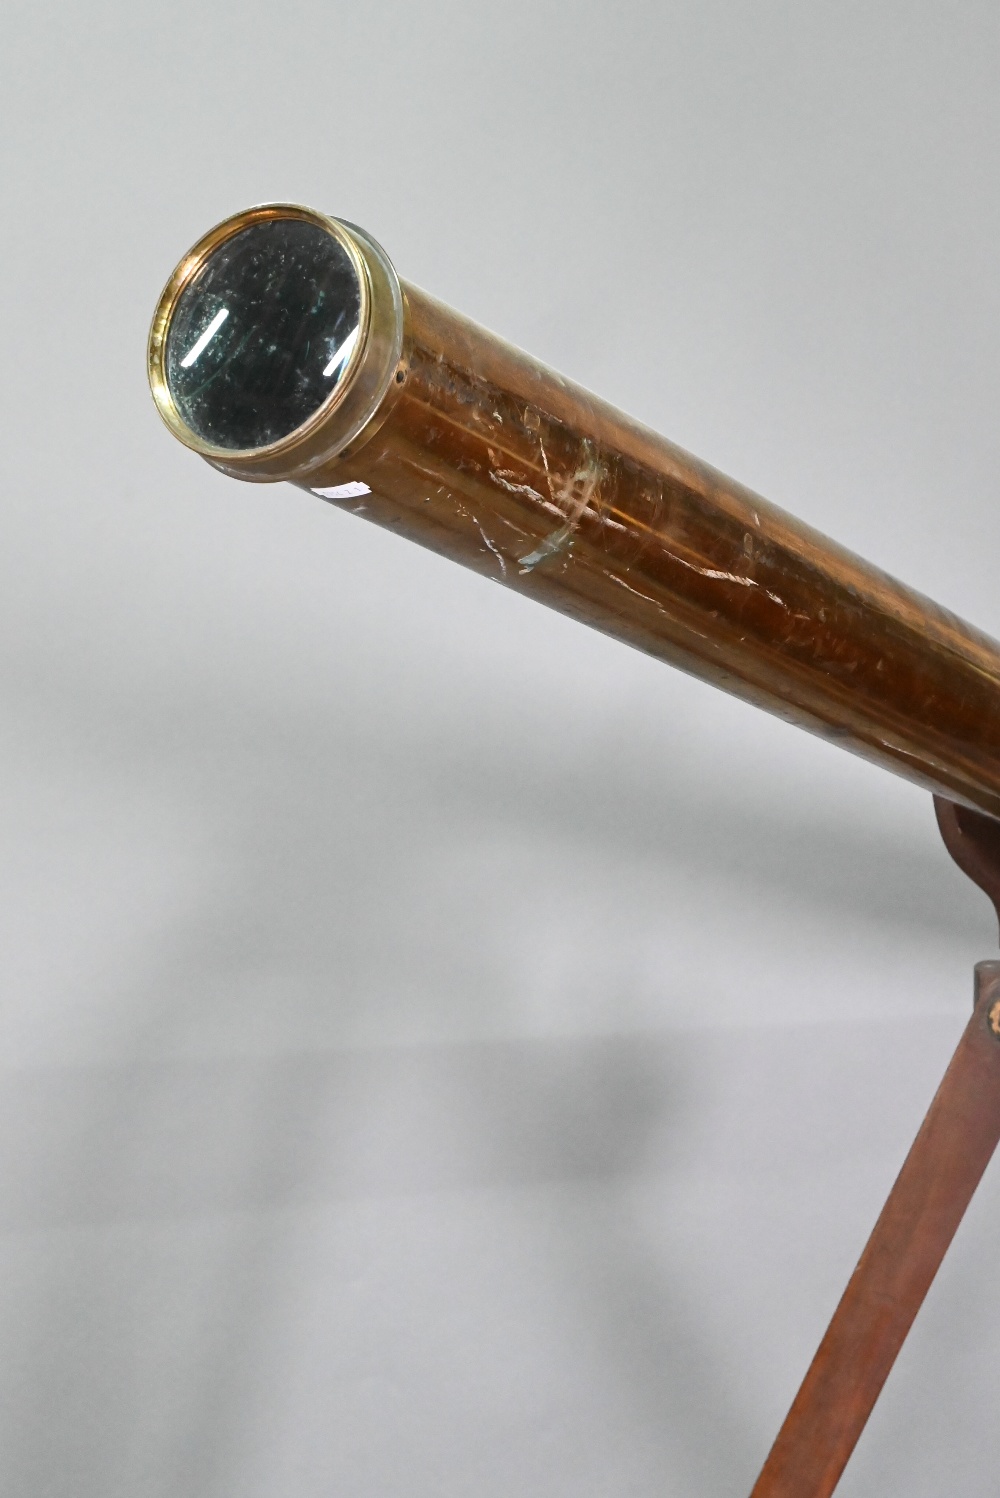 Dolland, London, a late 19th century brass tube telescope, raised on a folding wooden tripod stand - - Image 5 of 14